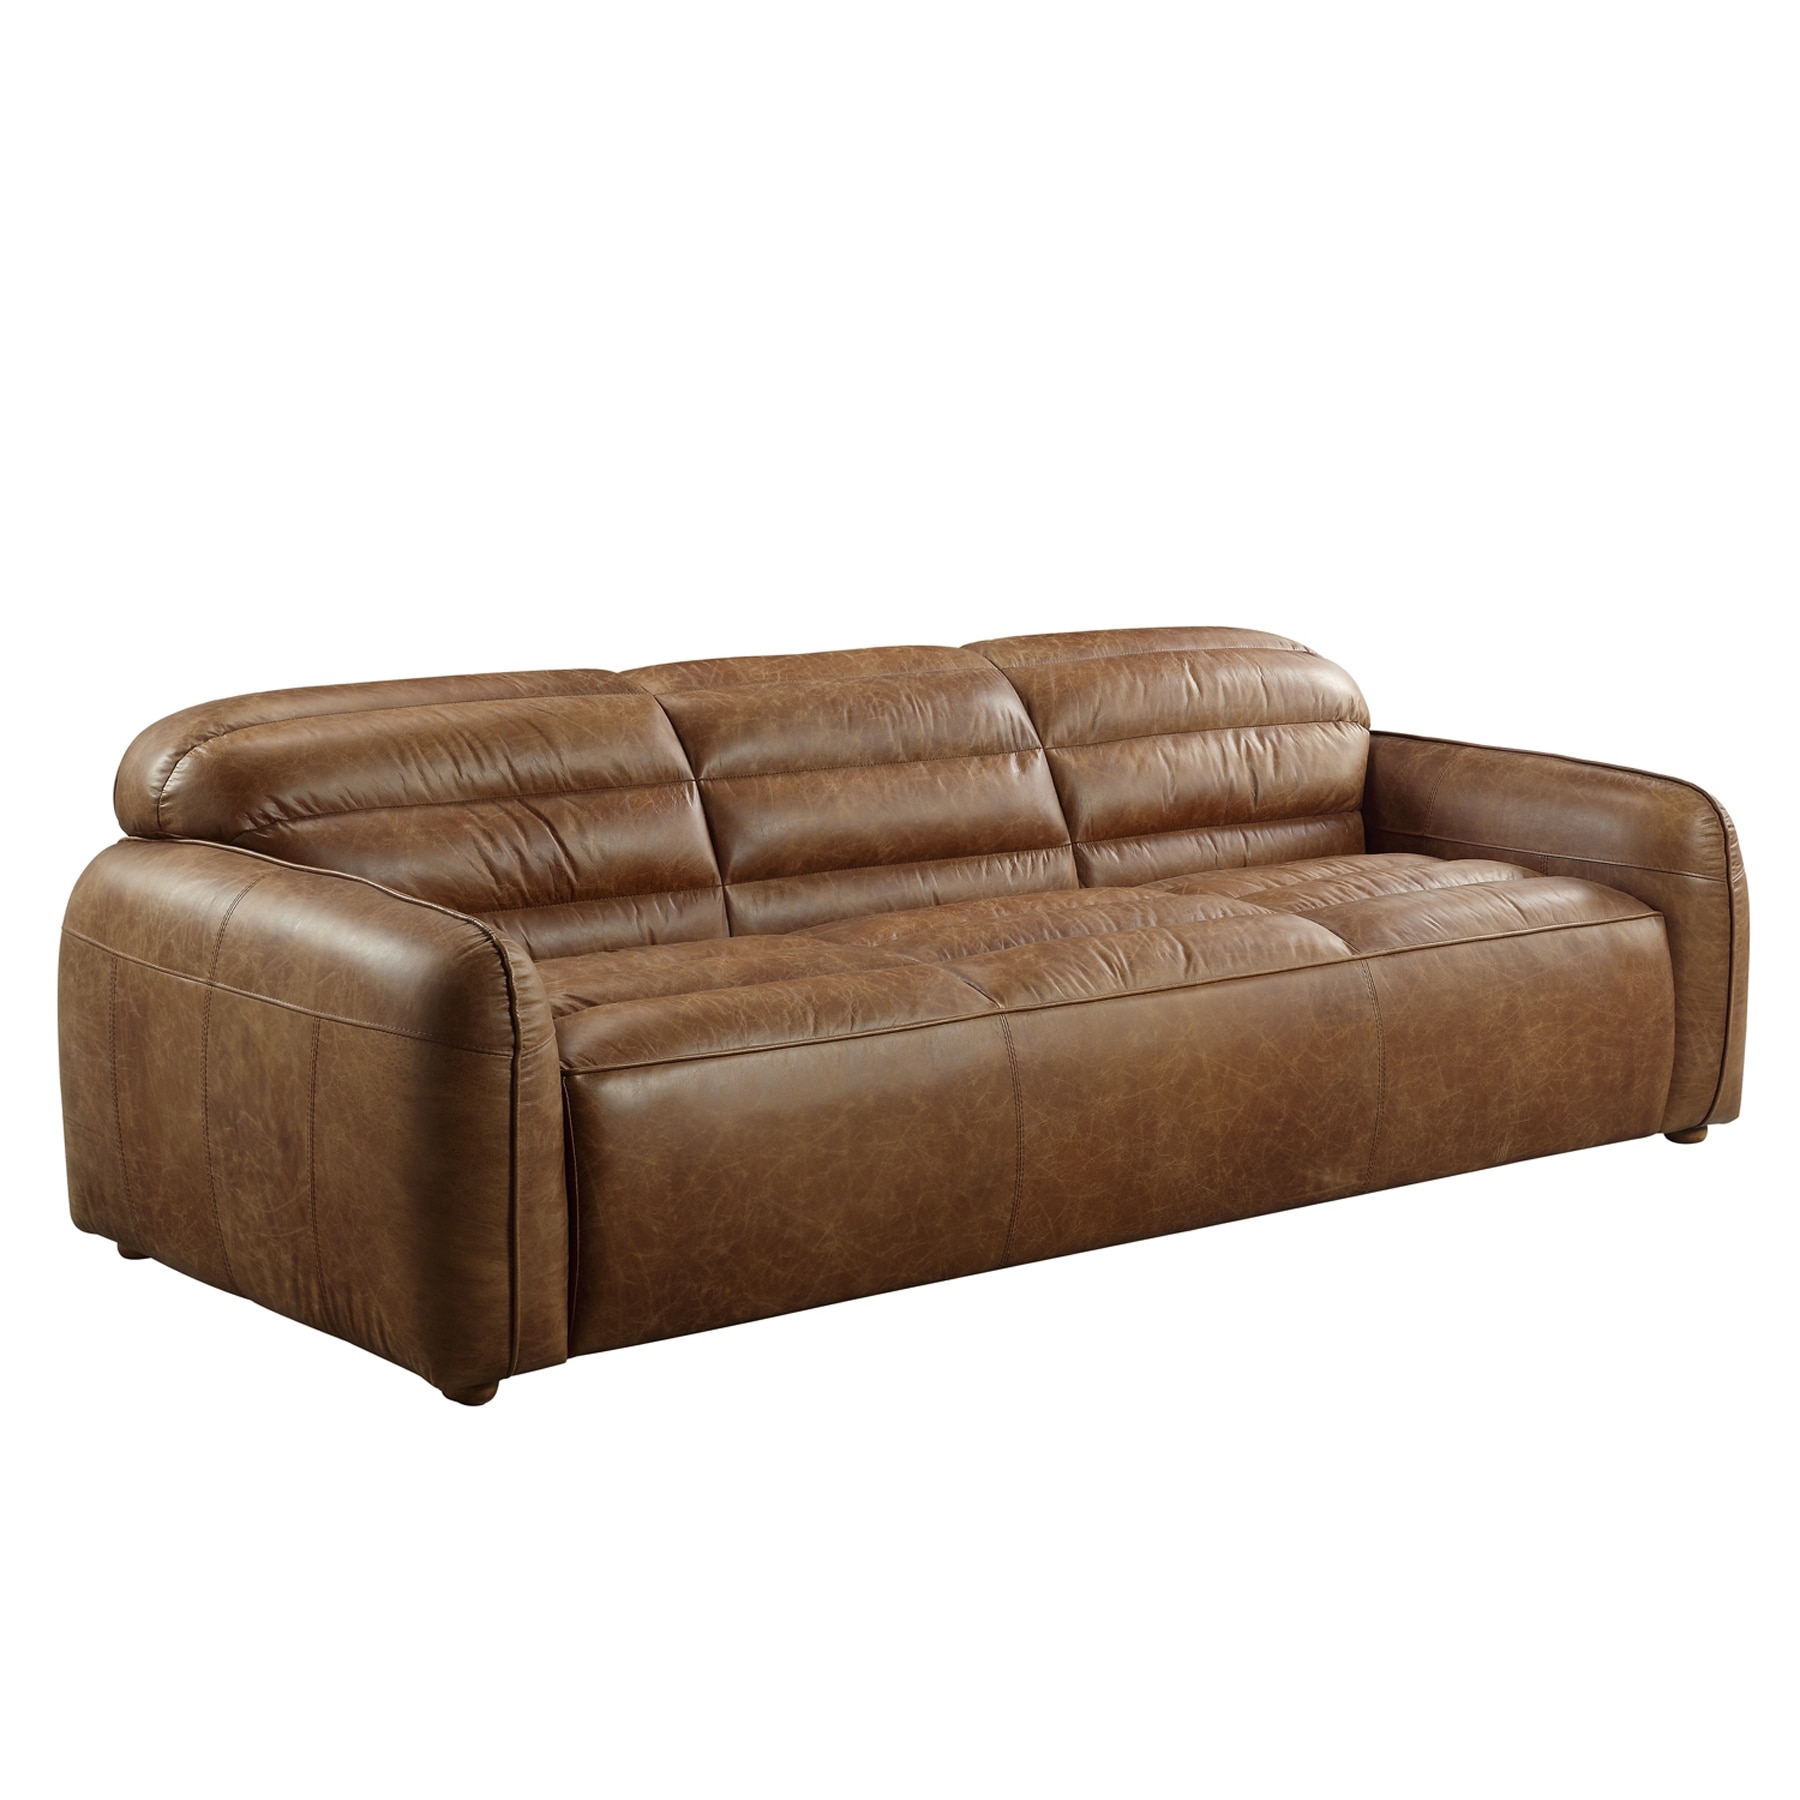 Leather Upholstered Sofa In Wisteria Cocoa Finish